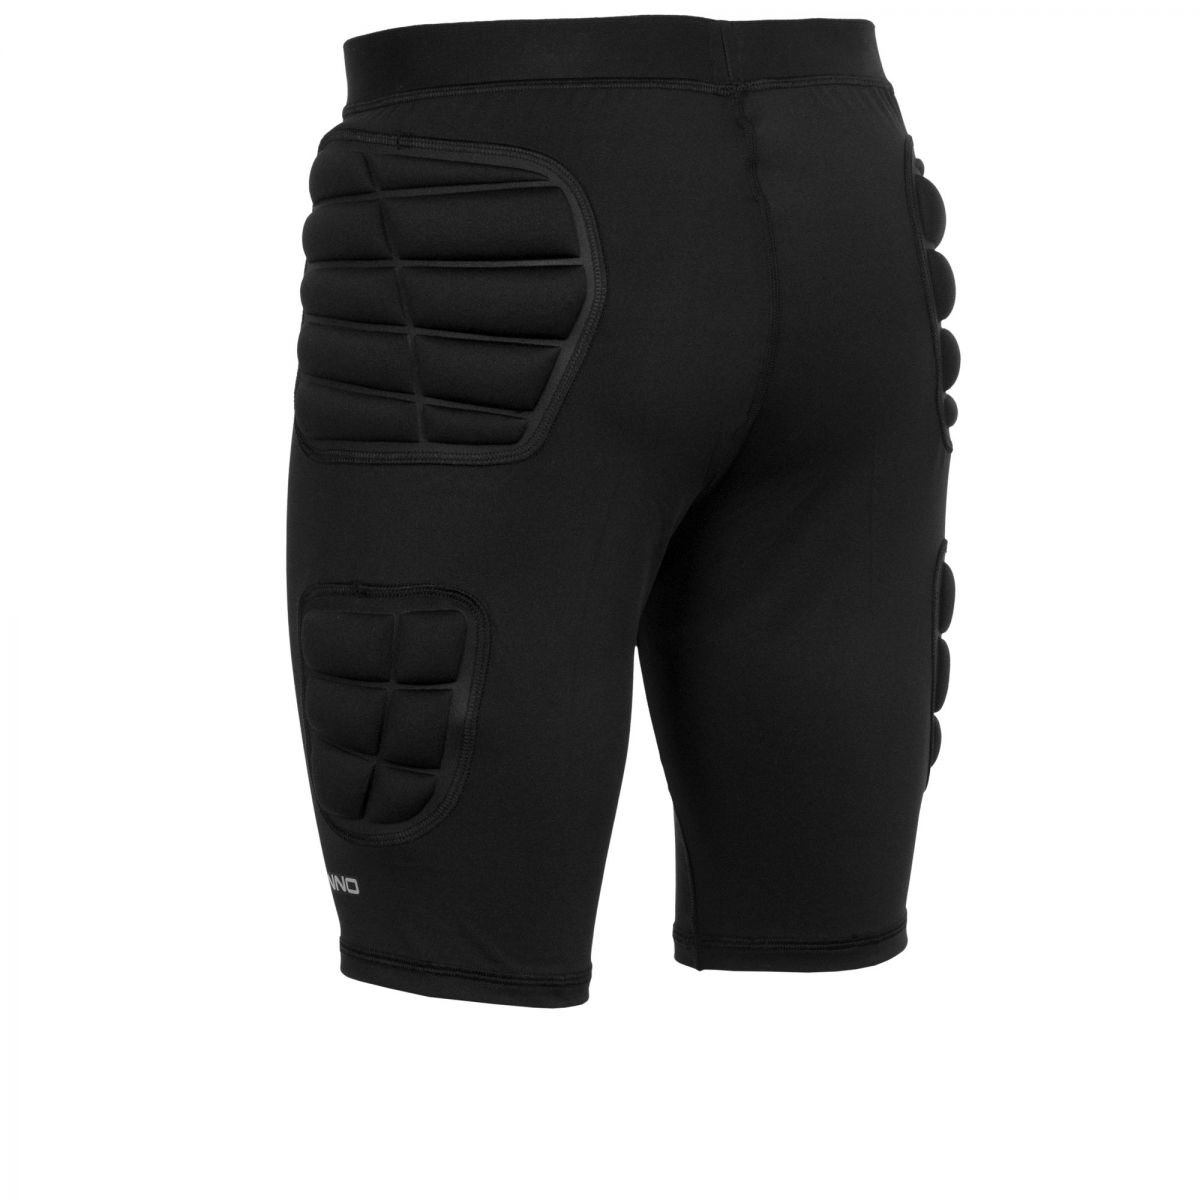 Stanno Protection Short